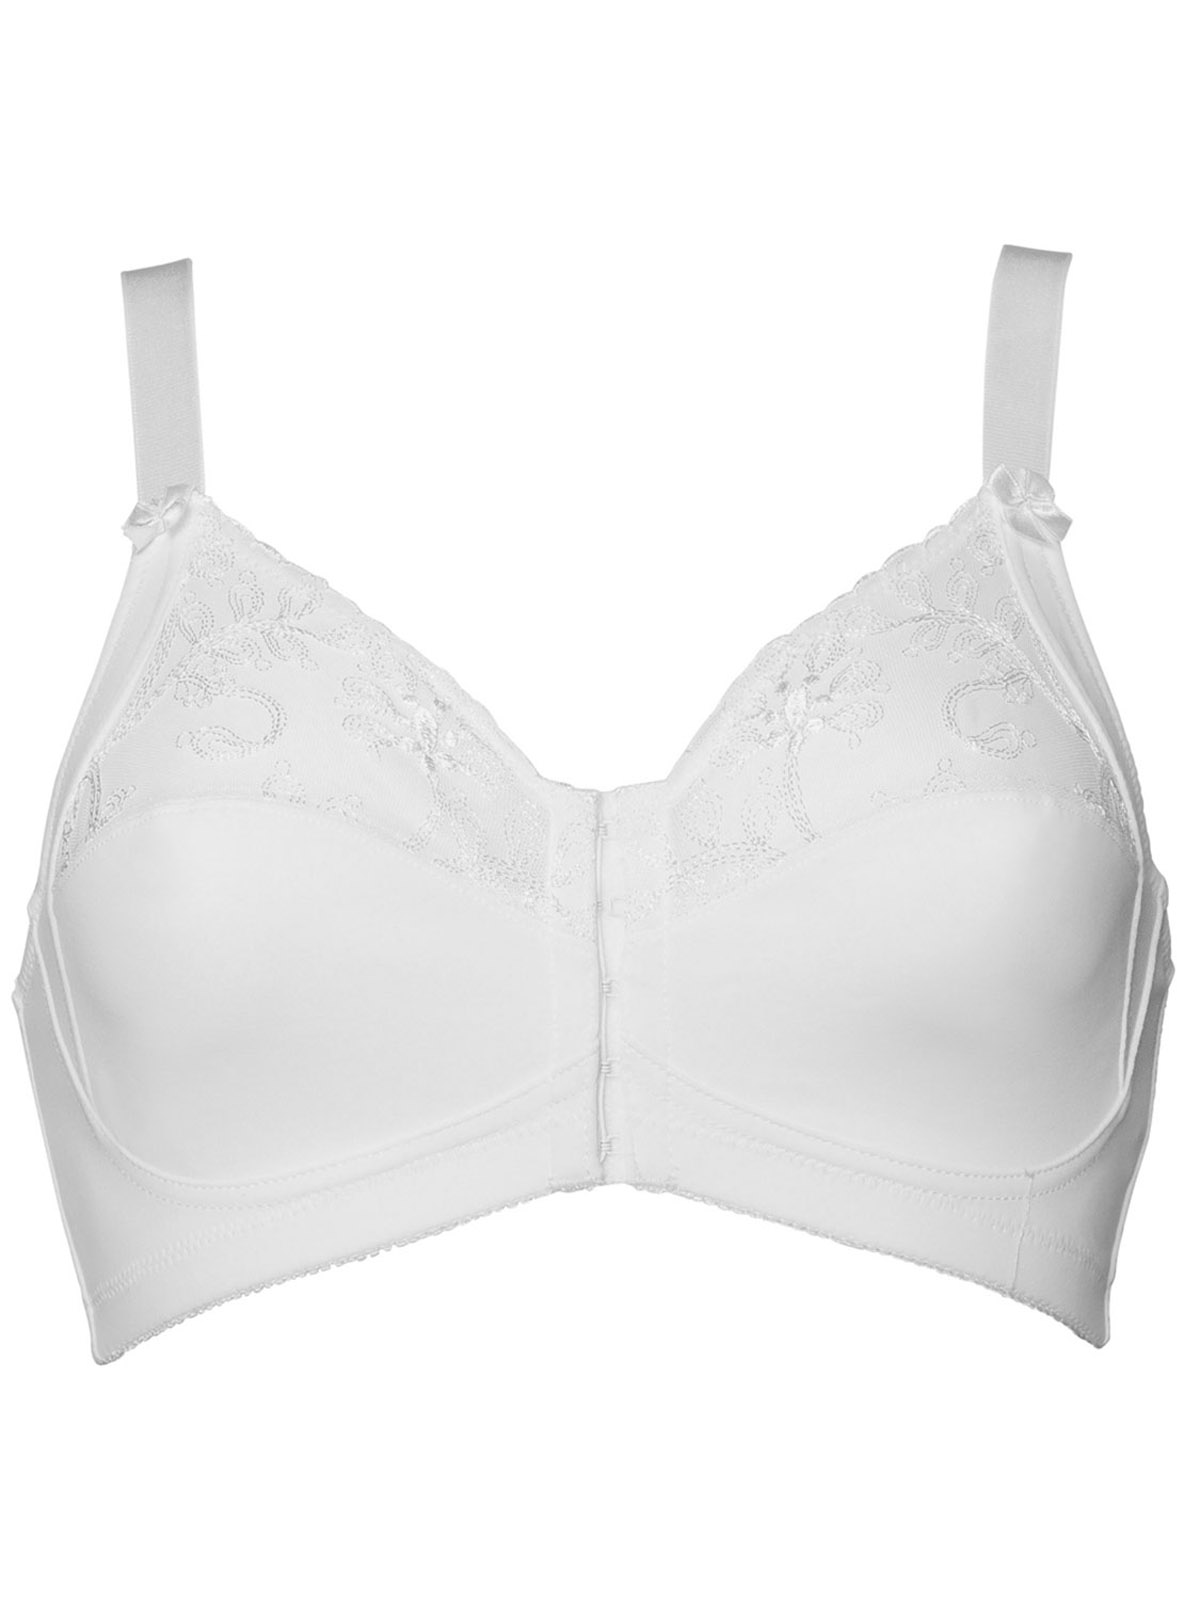 Naturana - - Naturana ASSORTED Front Fastening Lace Bras - Size 36 (B-D)